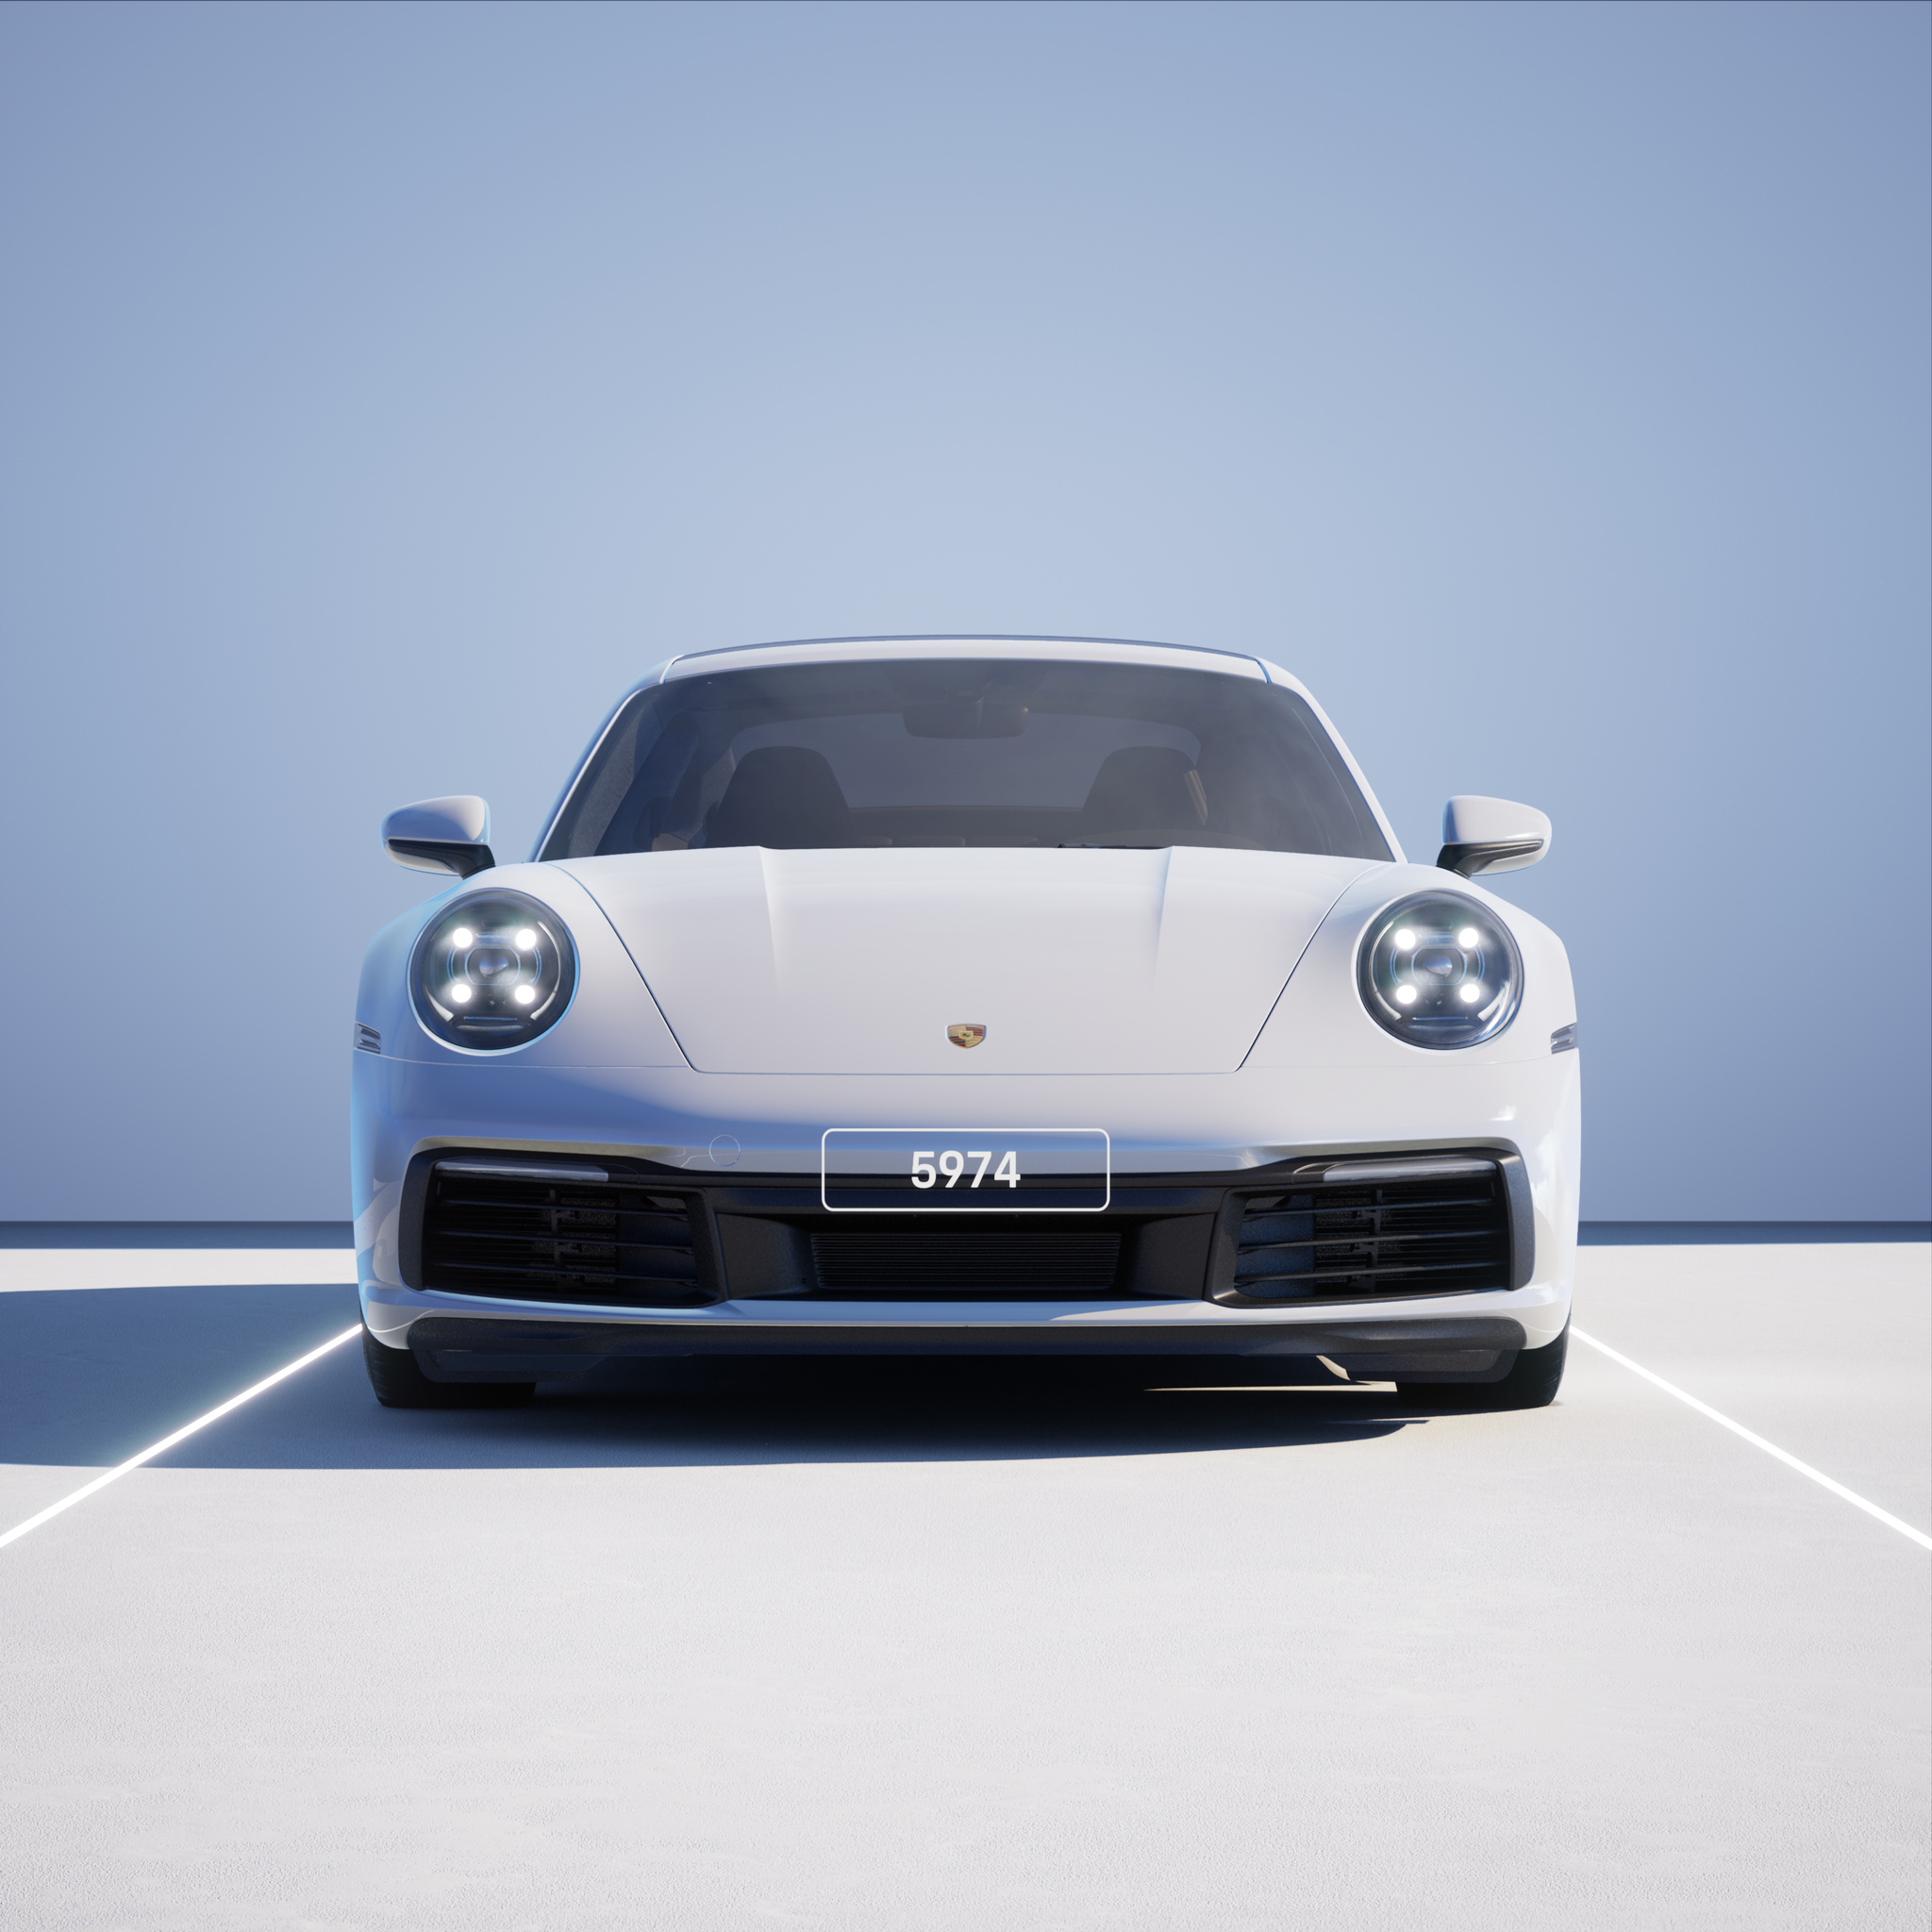 The PORSCHΞ 911 5974 image in phase